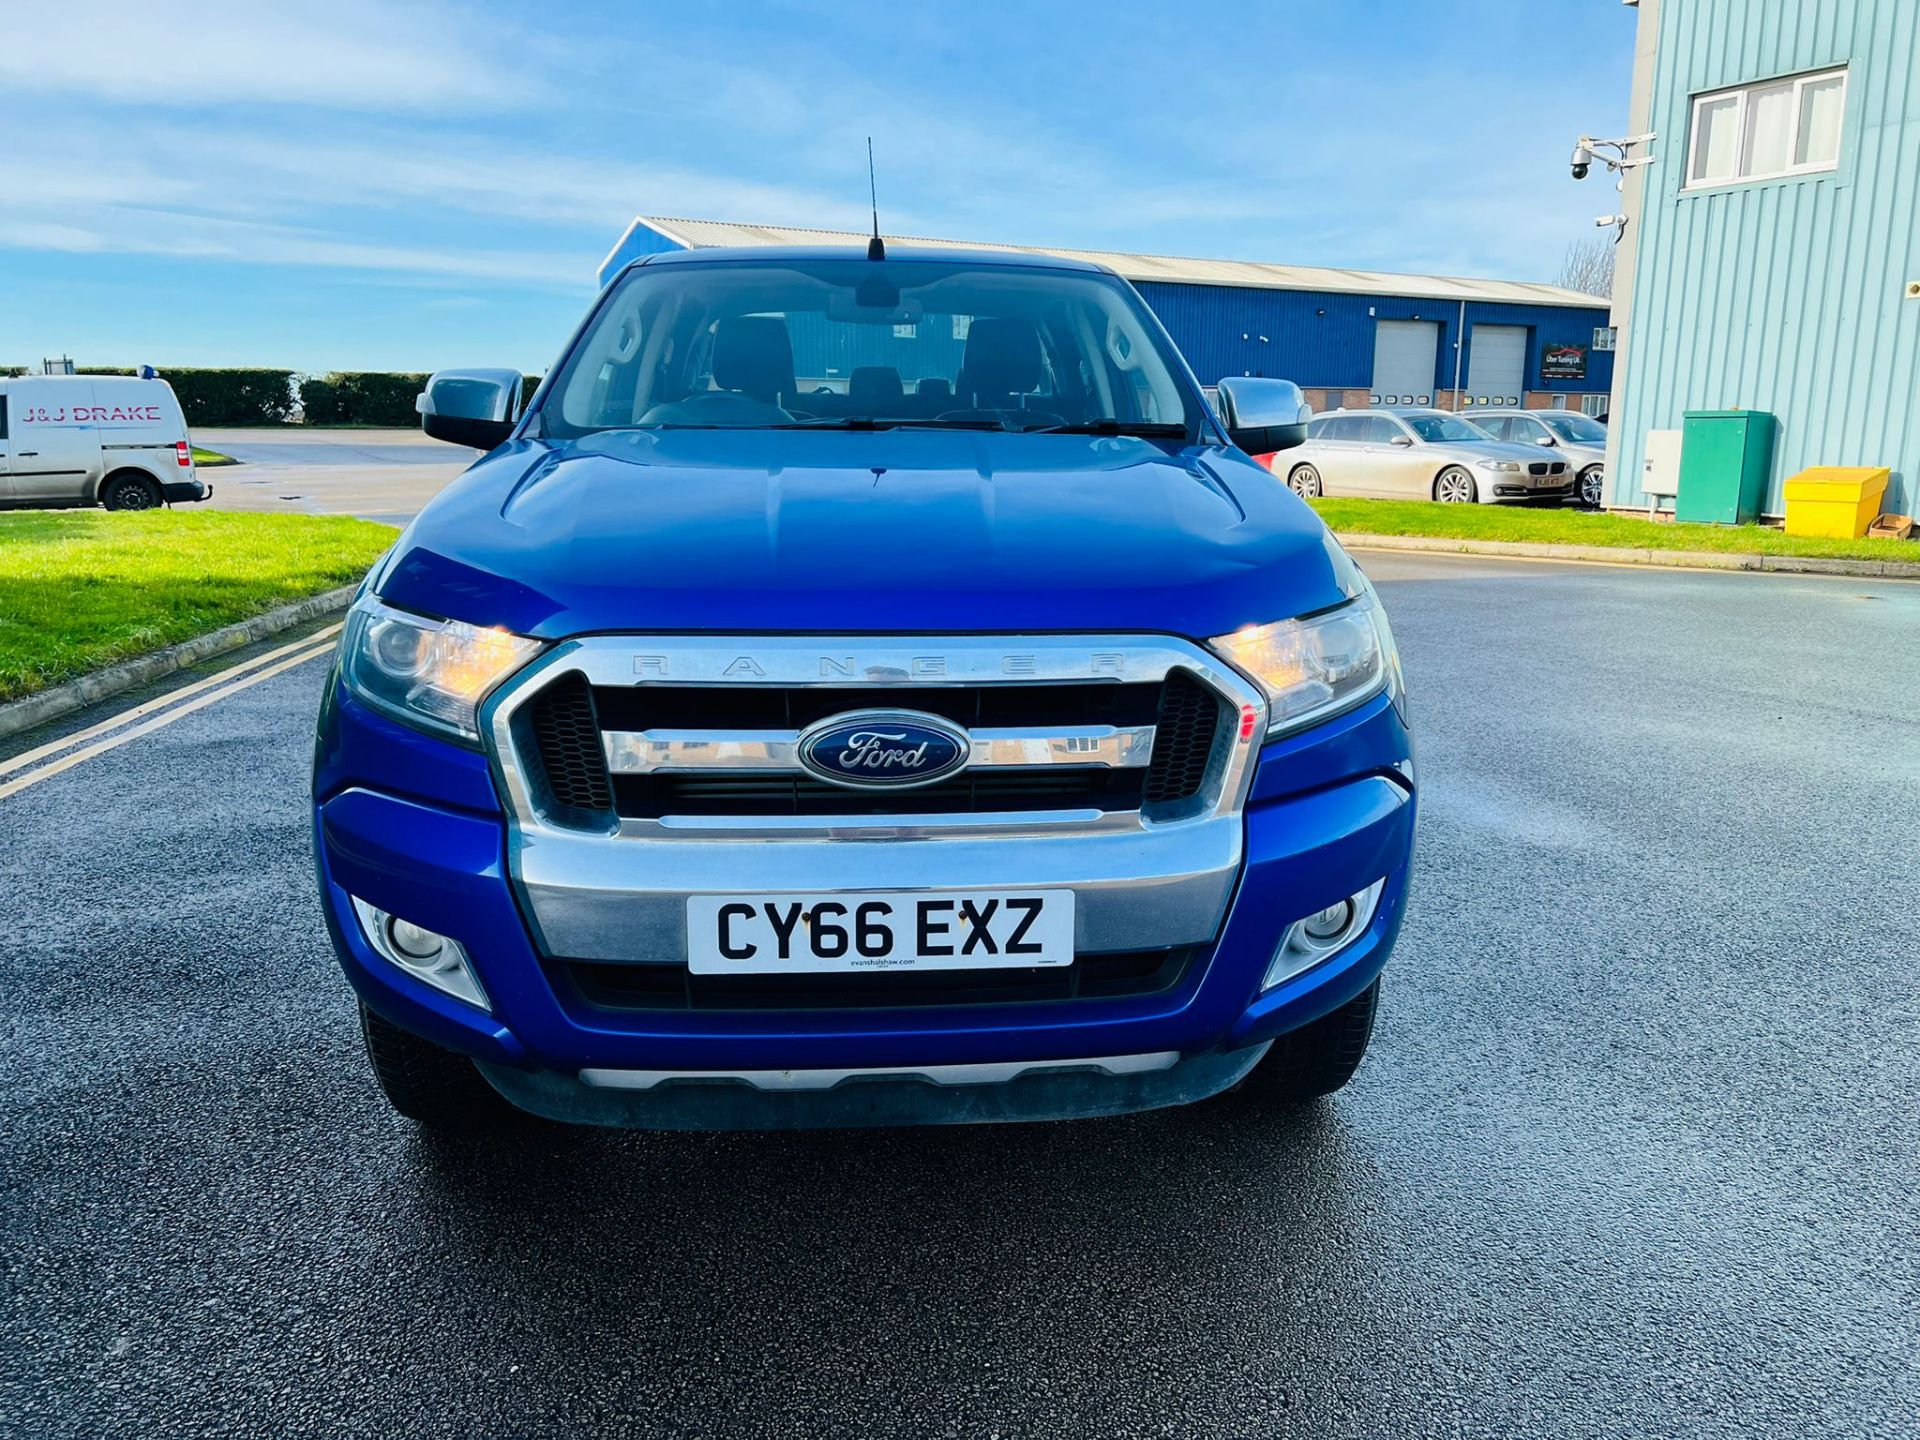 Ford Ranger 2.2 TDCI Limited 4x4 Double Cab - 2017 Model - Euro 6 - ULEZ Compliant - Air con - - Image 2 of 26